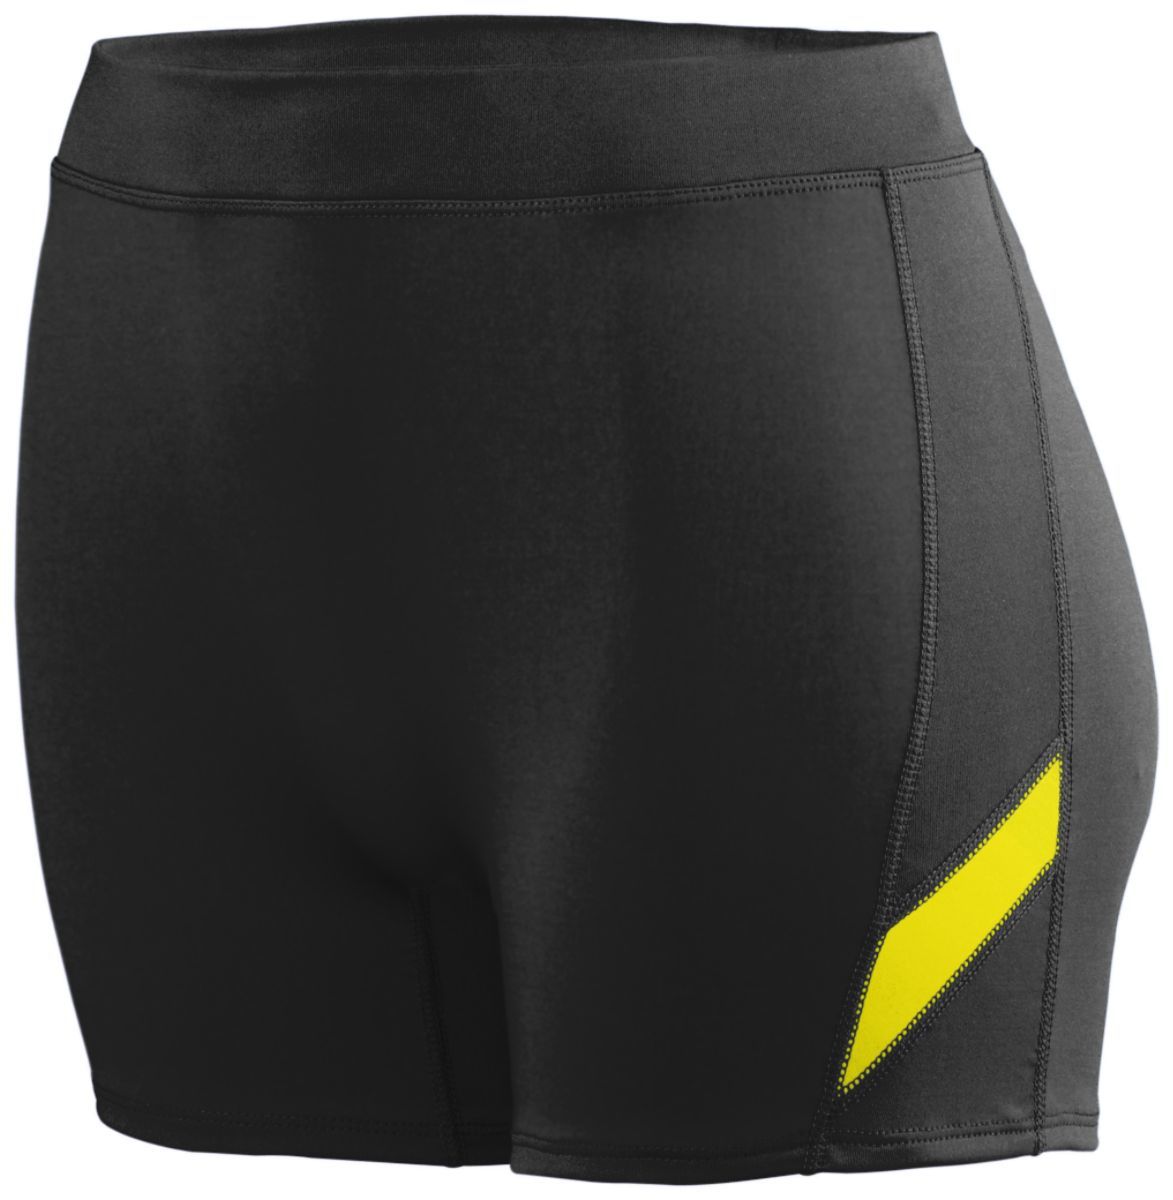 Augusta Sportswear Ladies Stride Shorts in Black/Power Yellow  -Part of the Ladies, Ladies-Shorts, Augusta-Products, Volleyball product lines at KanaleyCreations.com